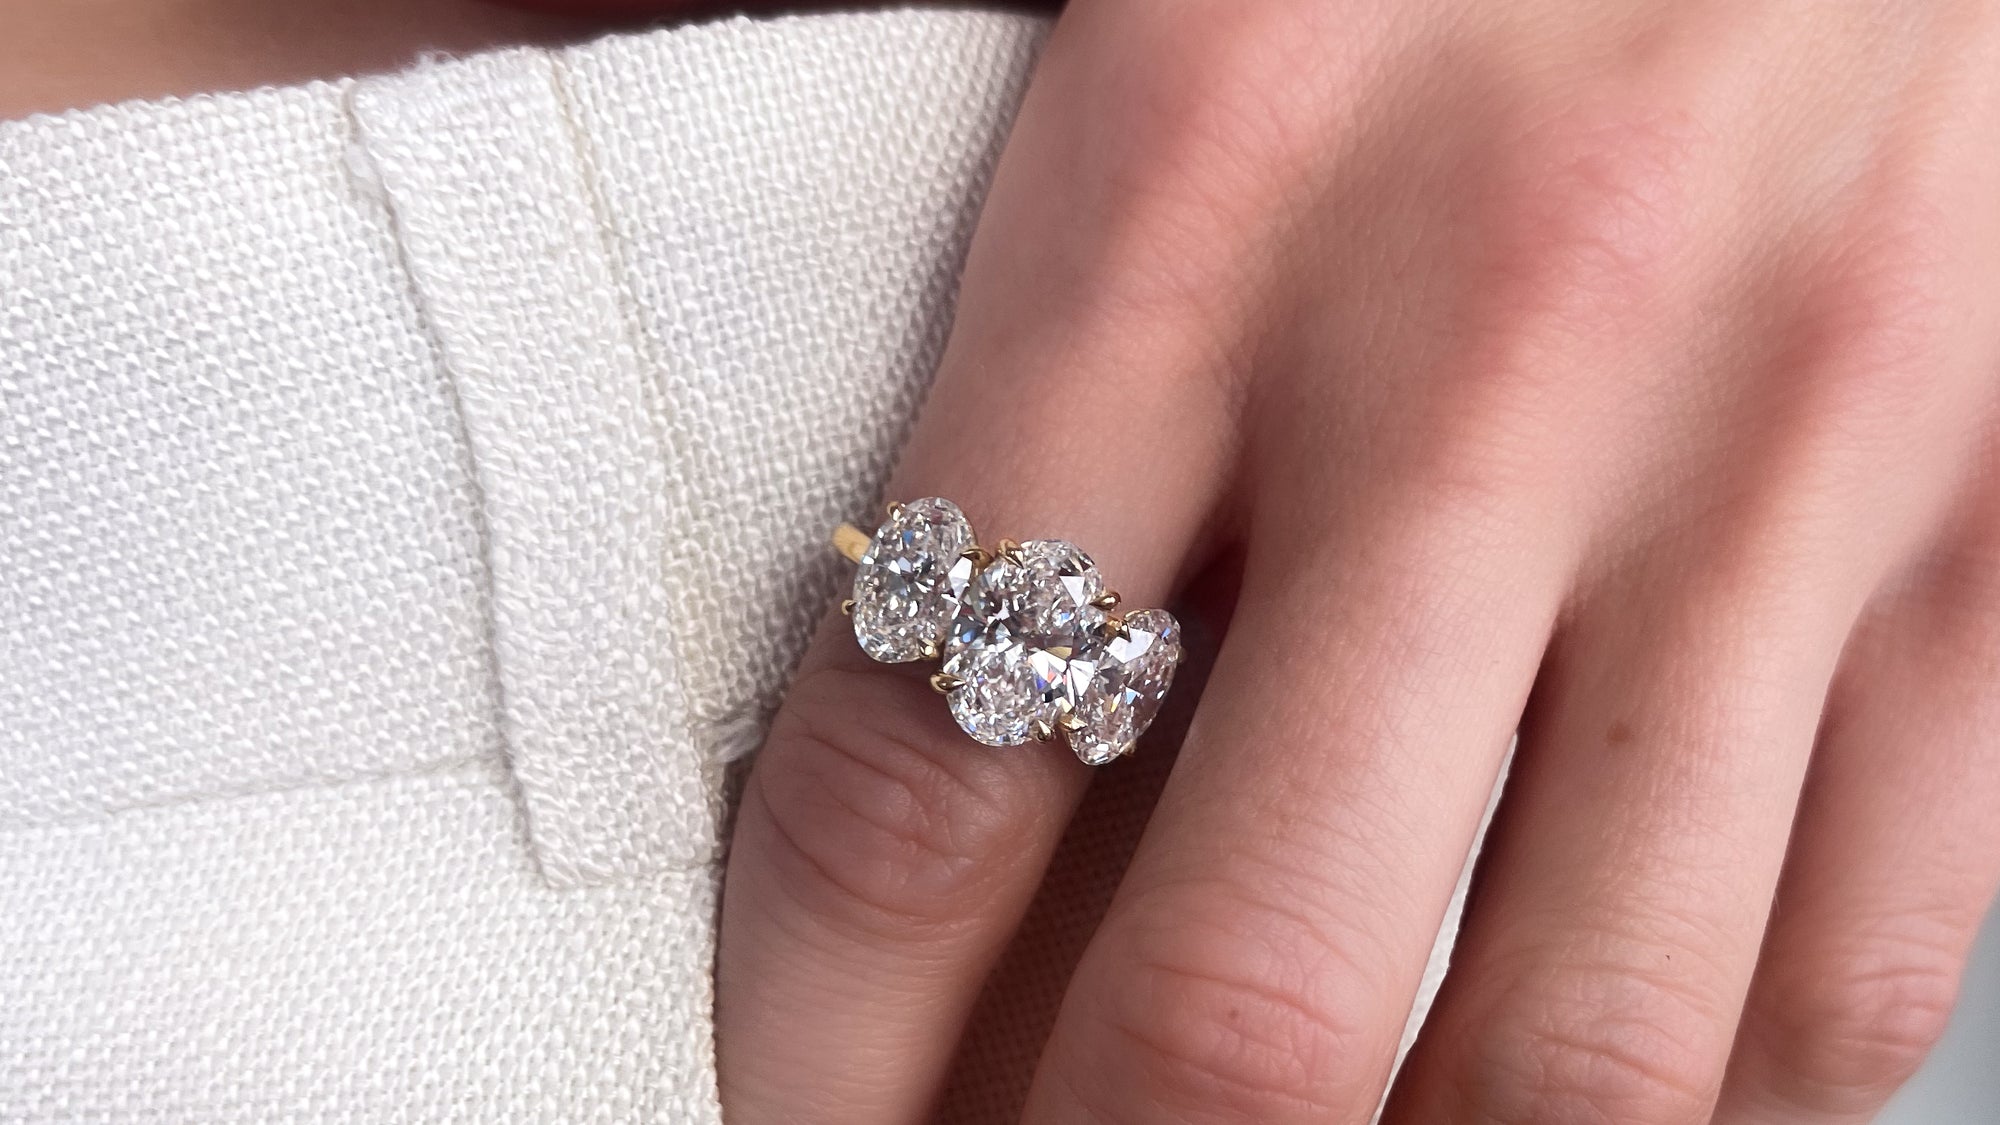 Why is Everyone Obsessed with Oval Engagement Rings?